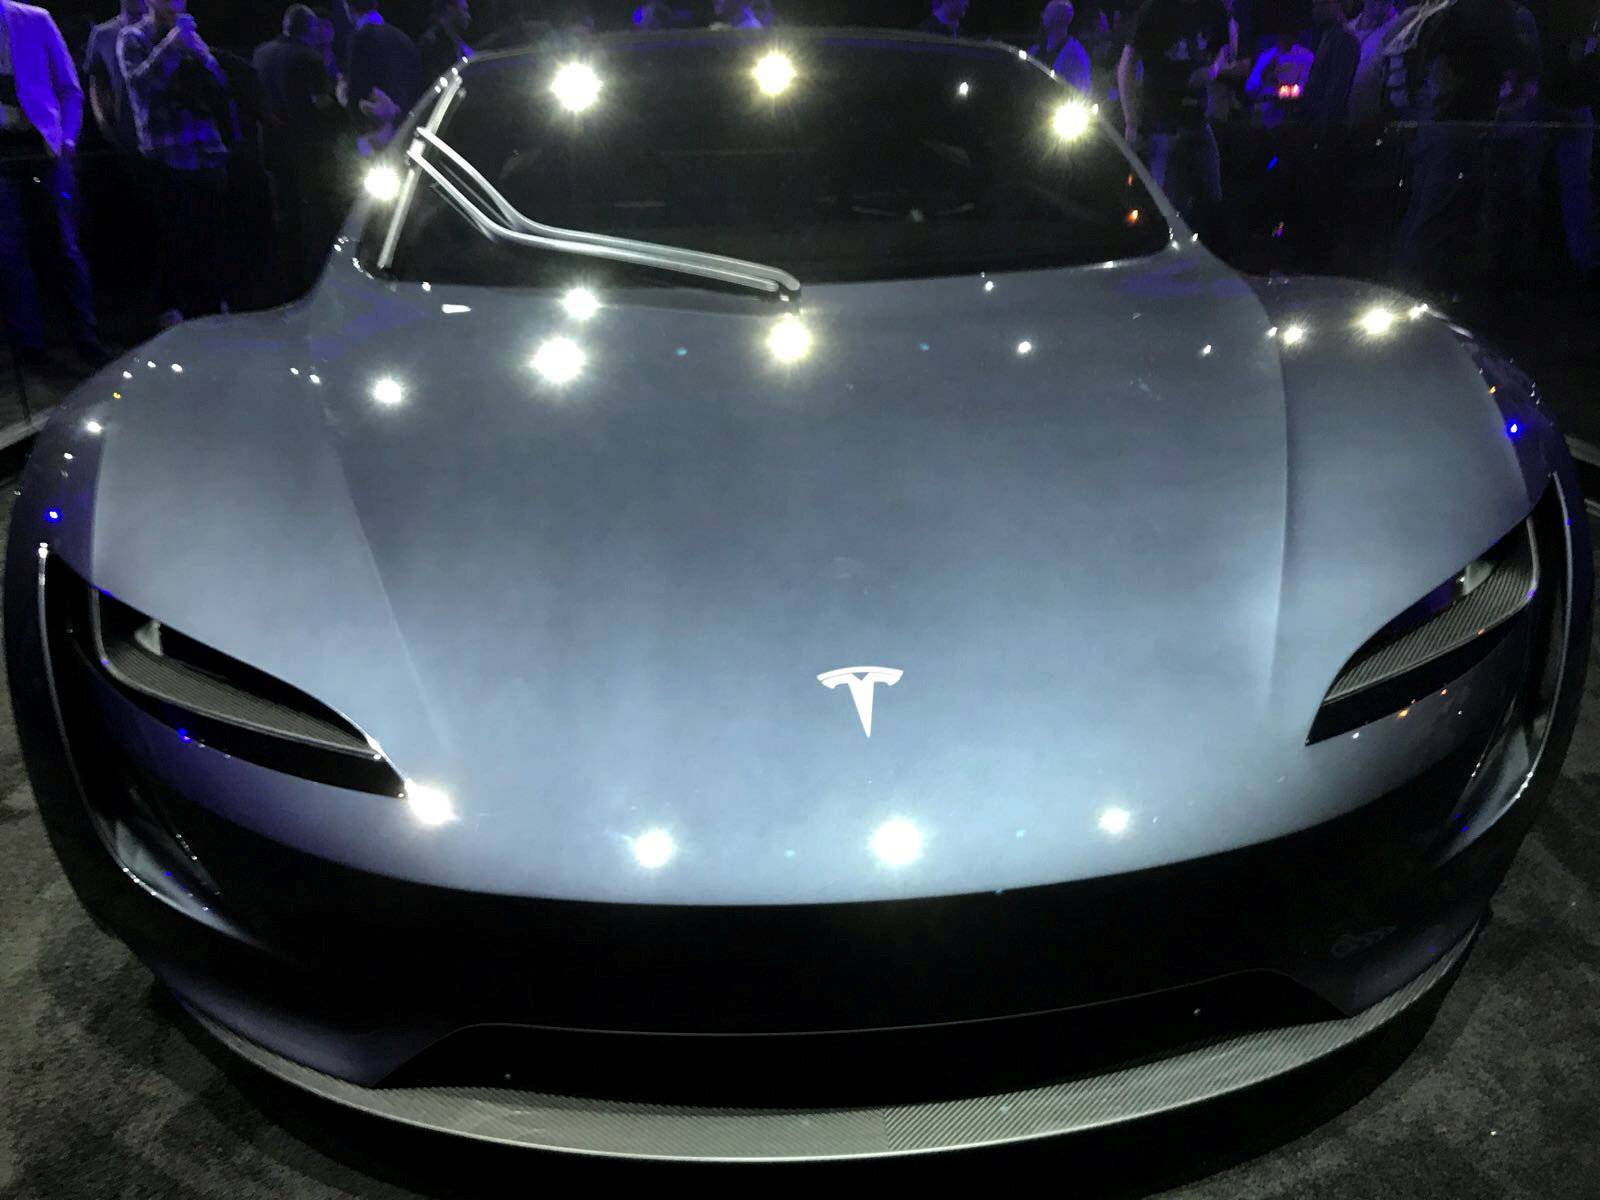 Tesla's new Roadster is unveiled during a presentation in Hawthorne